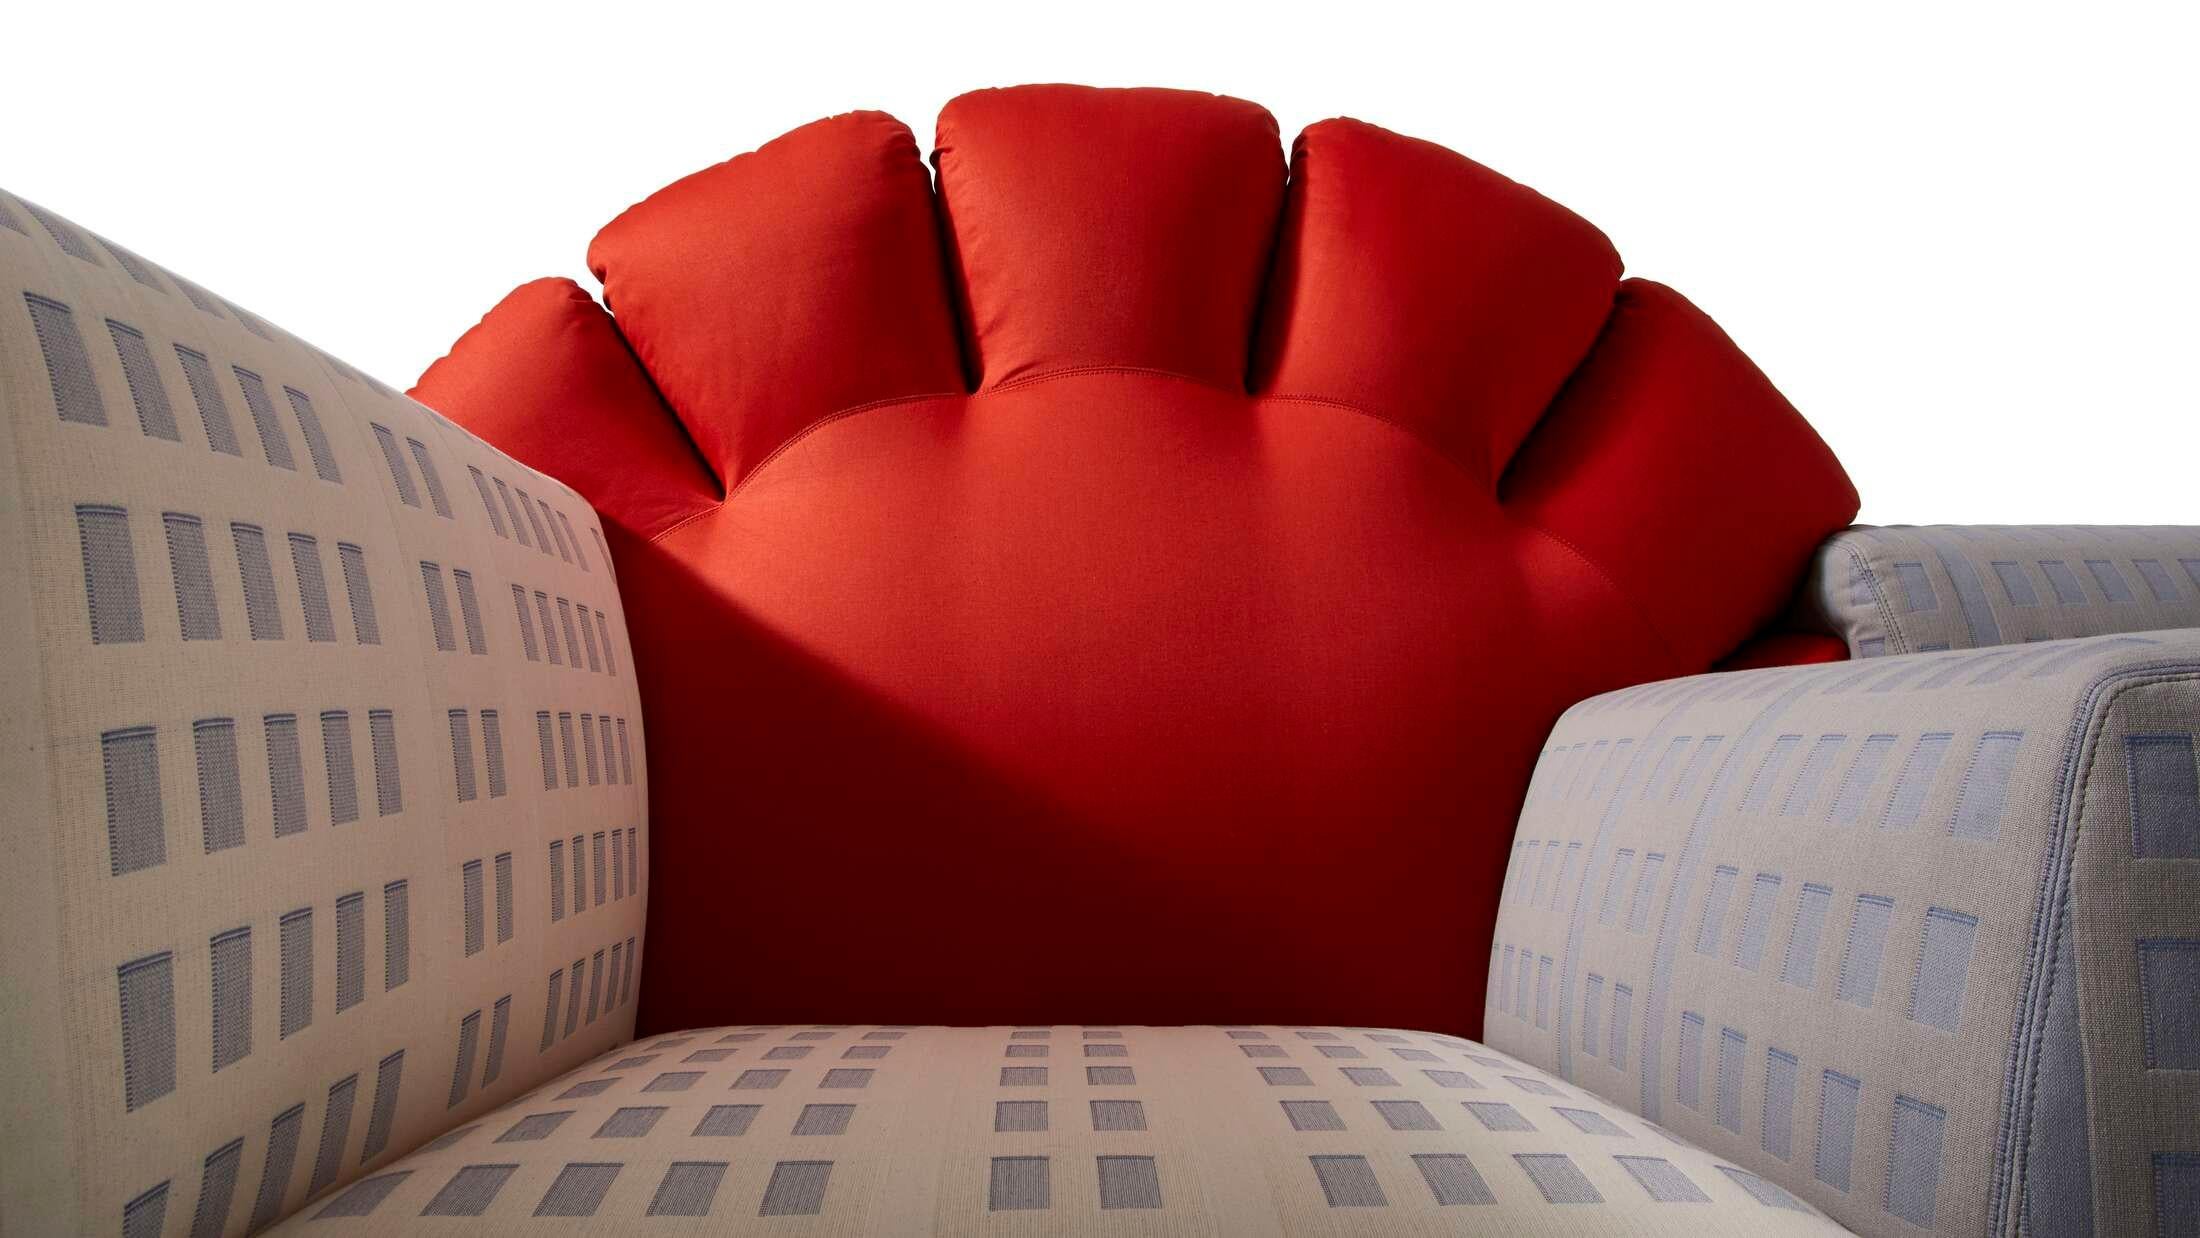 Mid-Century Modern 1 of 50 limited edition Tramonto A New York Sofa by Gaetano Pesce for Cassina